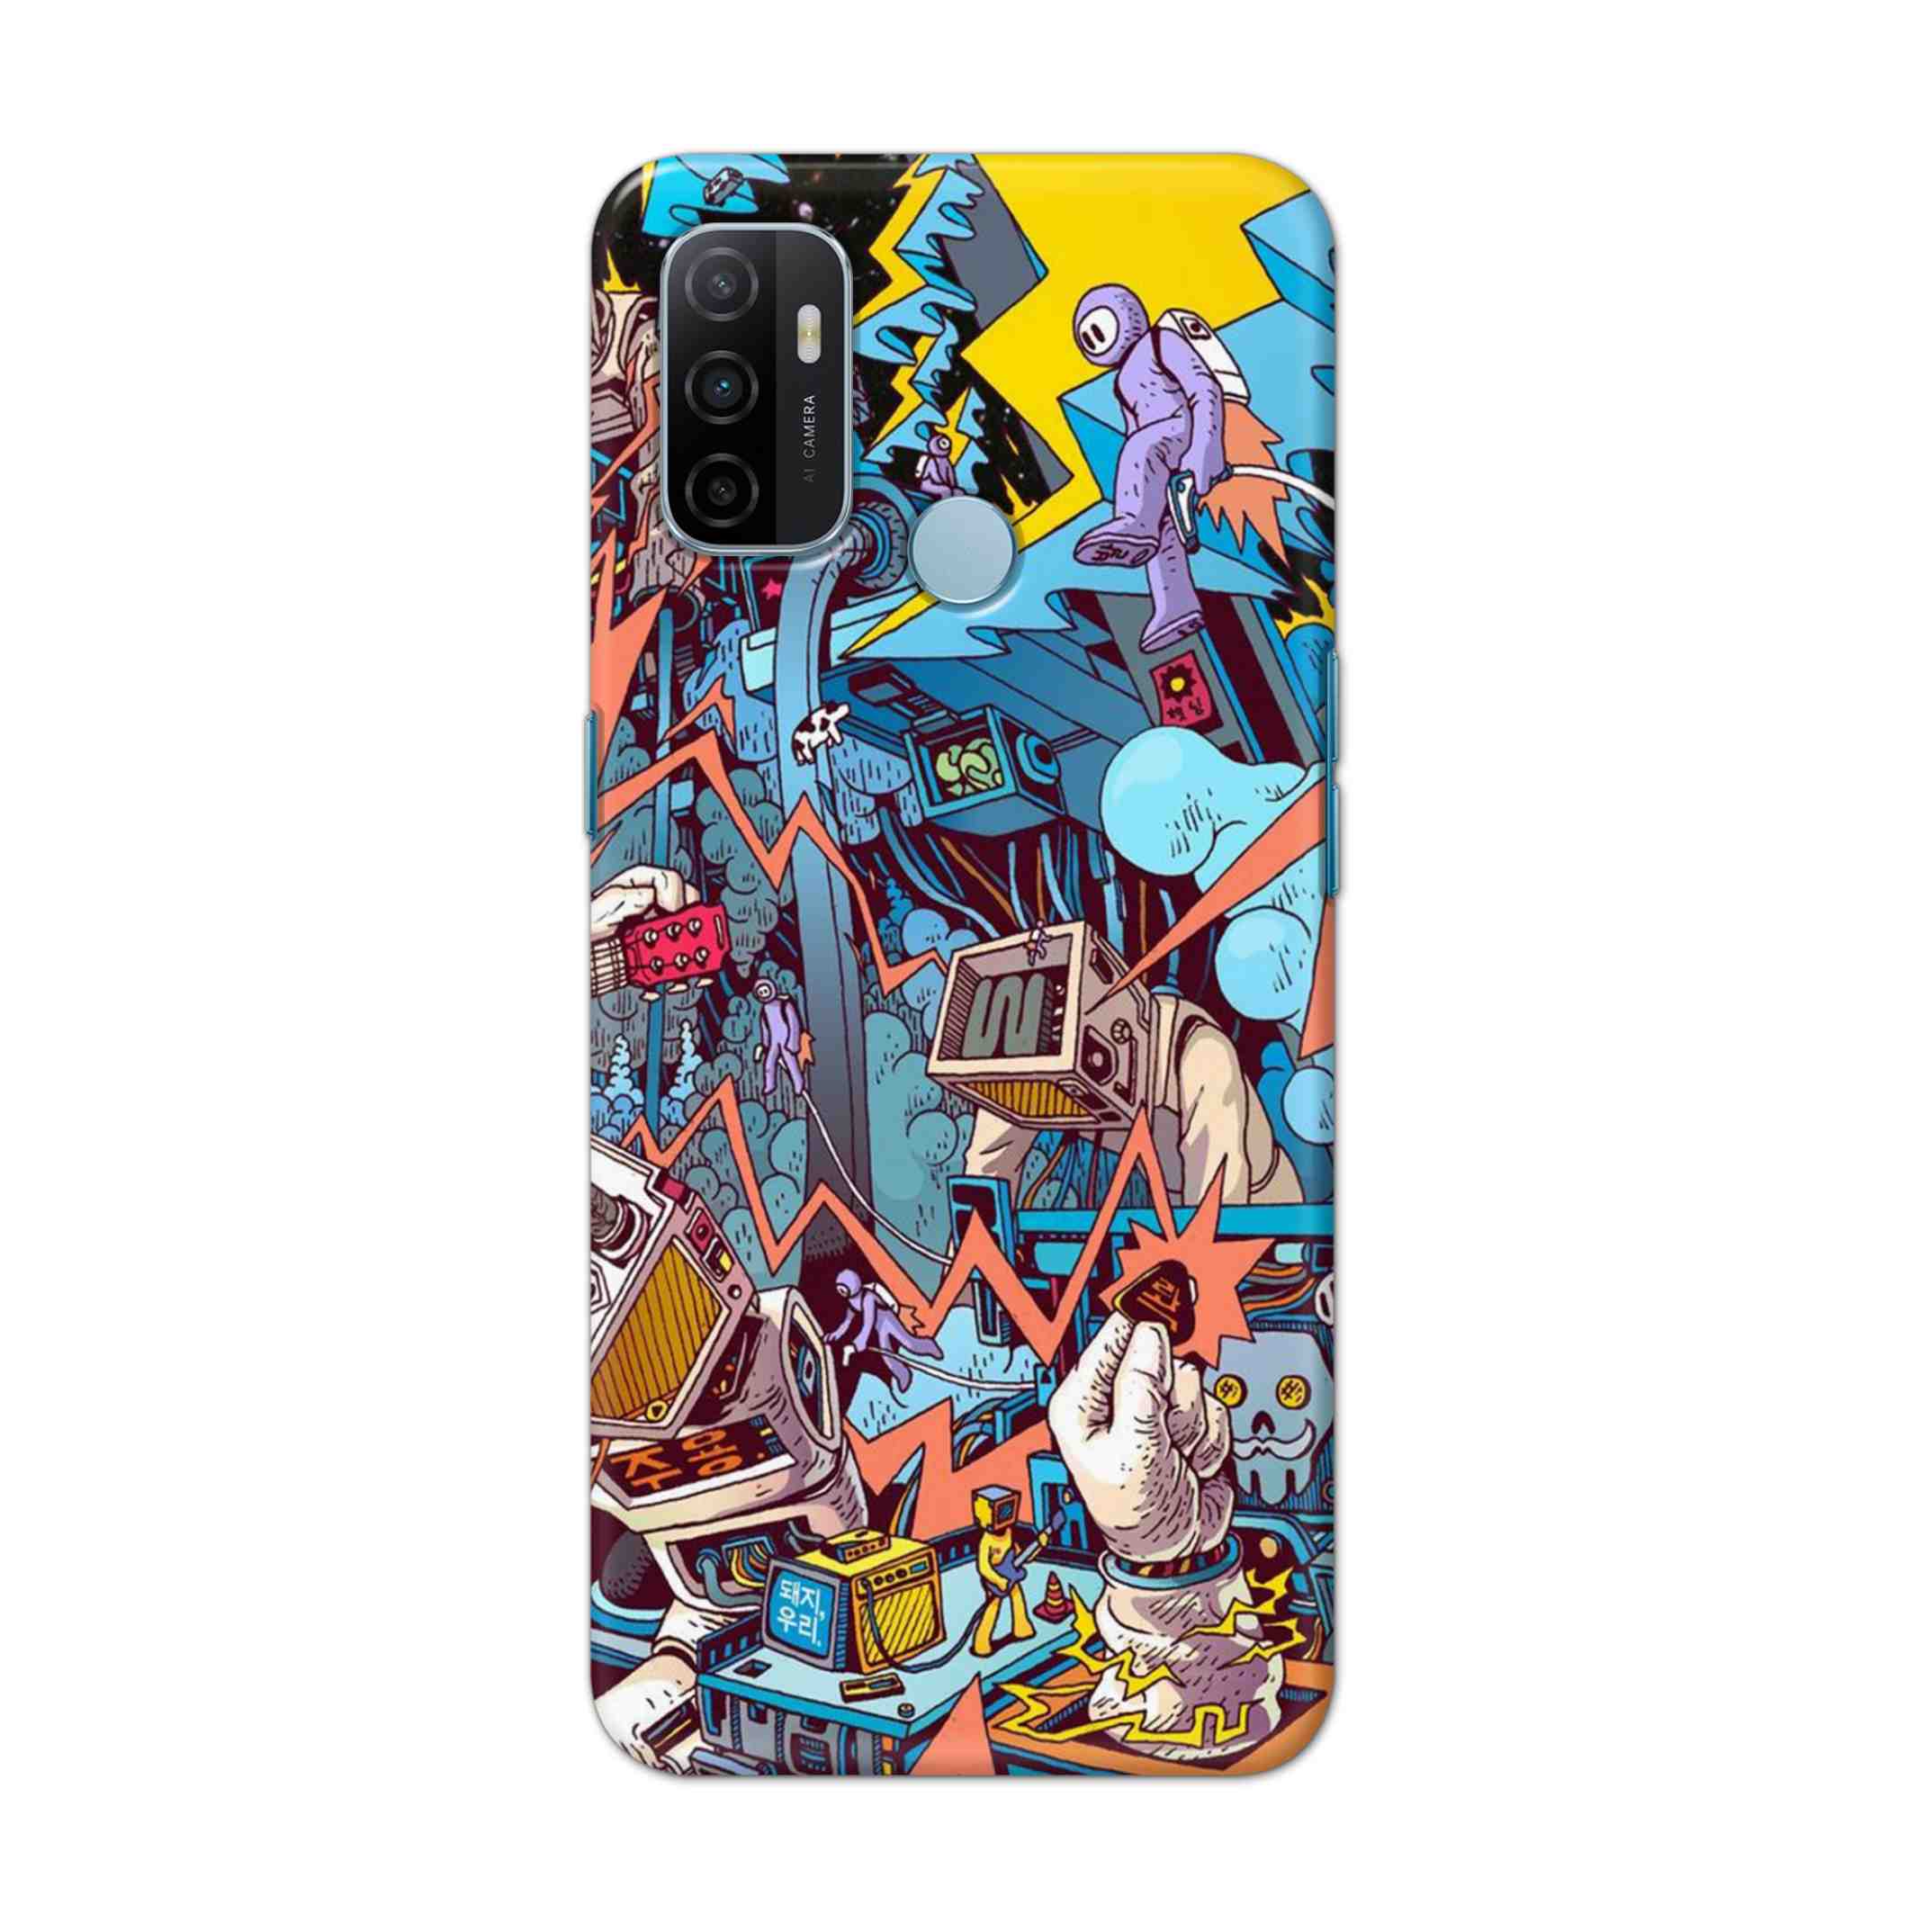 Buy Ofo Panic Hard Back Mobile Phone Case Cover For OPPO A53 (2020) Online